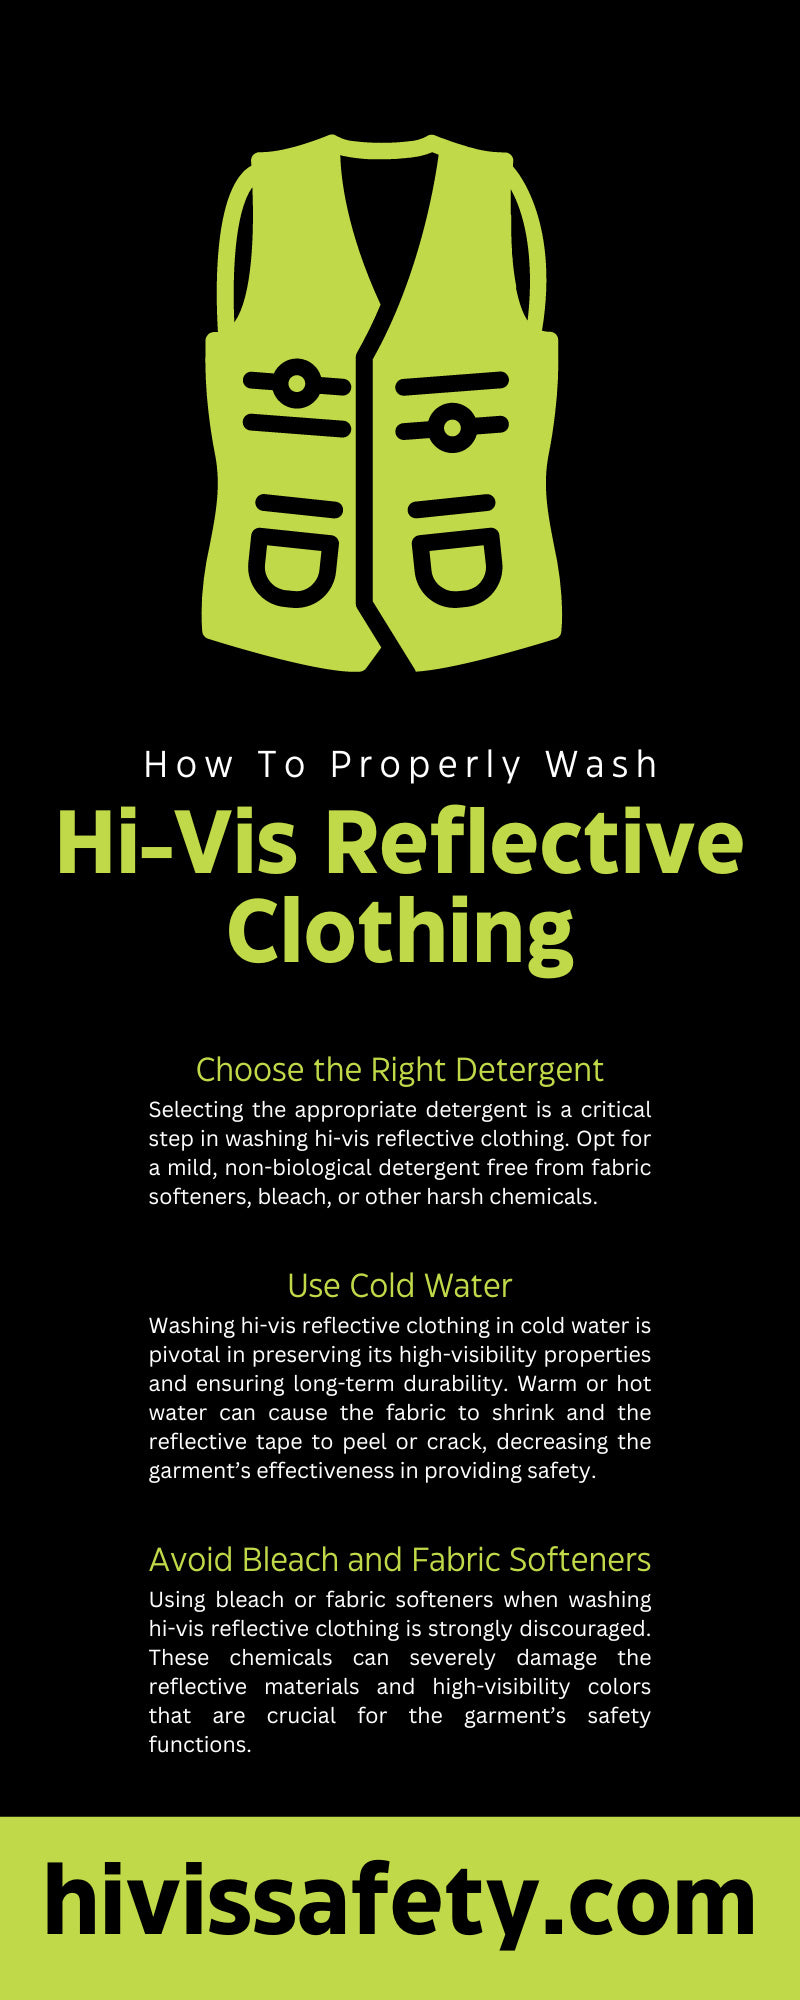 How To Properly Wash Hi-Vis Reflective Clothing